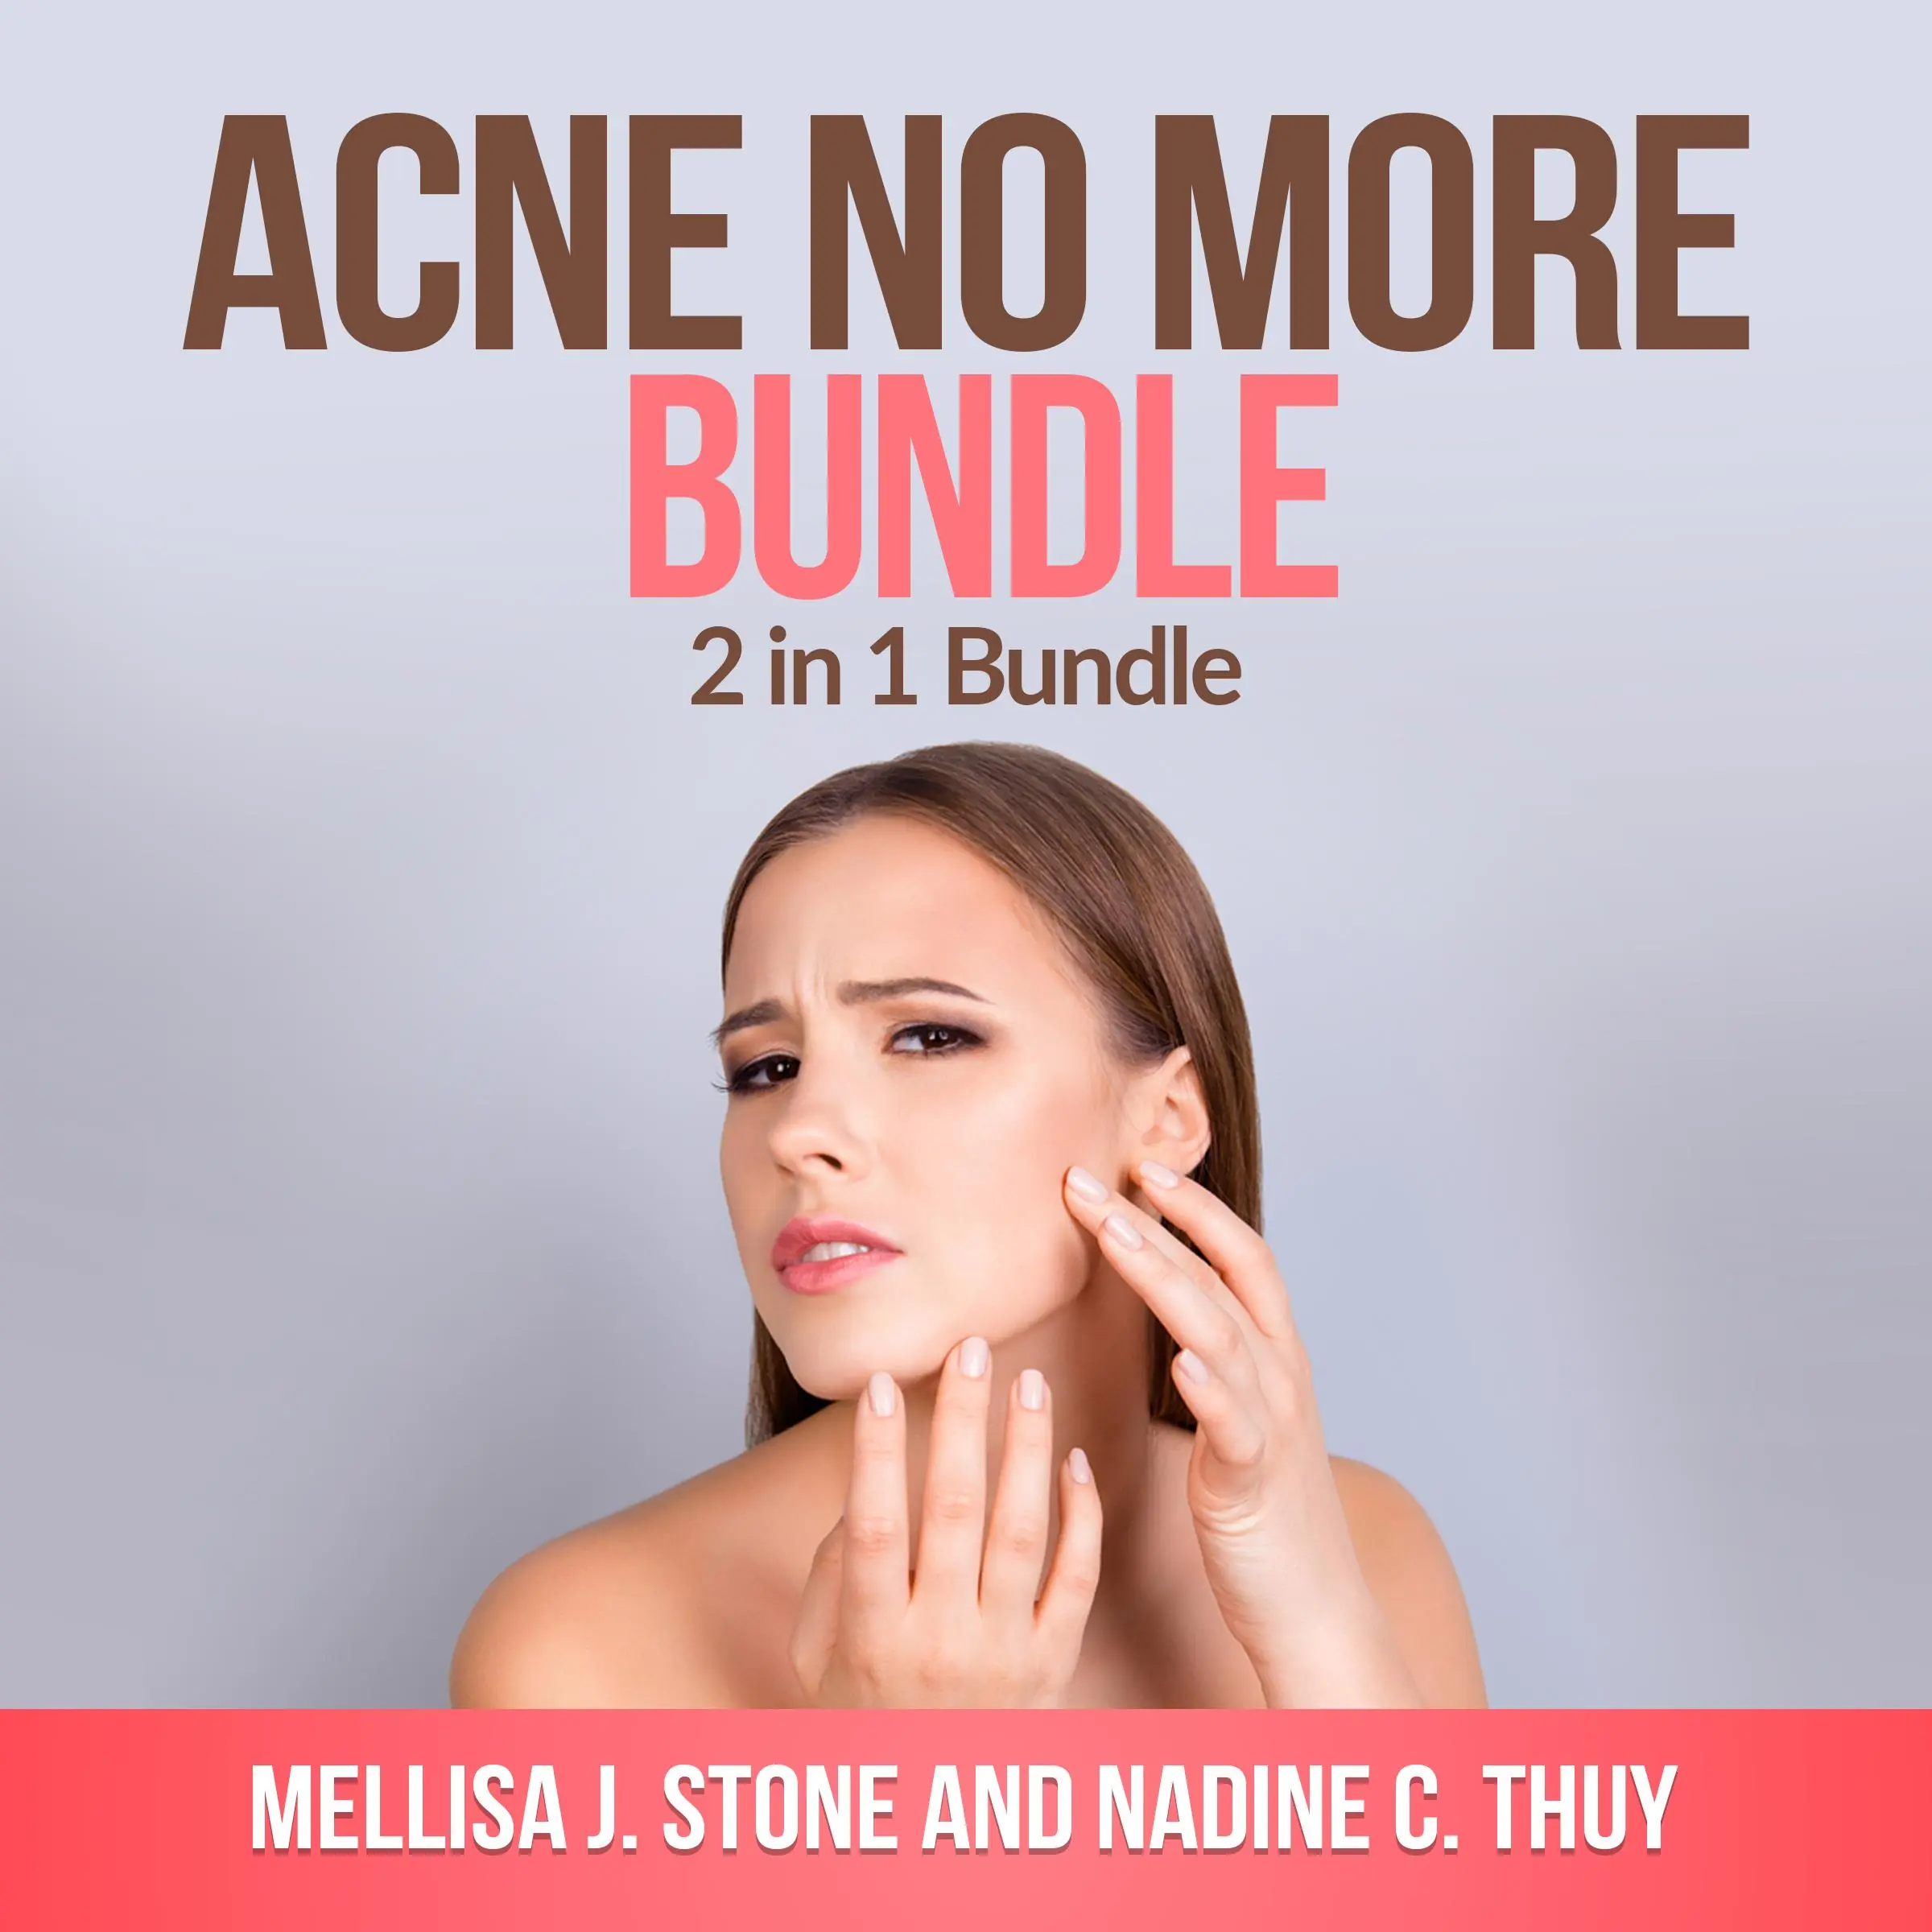 Acne no more Bundle: 2 in 1 Bundle, Acne, Acne Treatment for Teens Audiobook by Mellisa J Stone and Nadine C Thuy